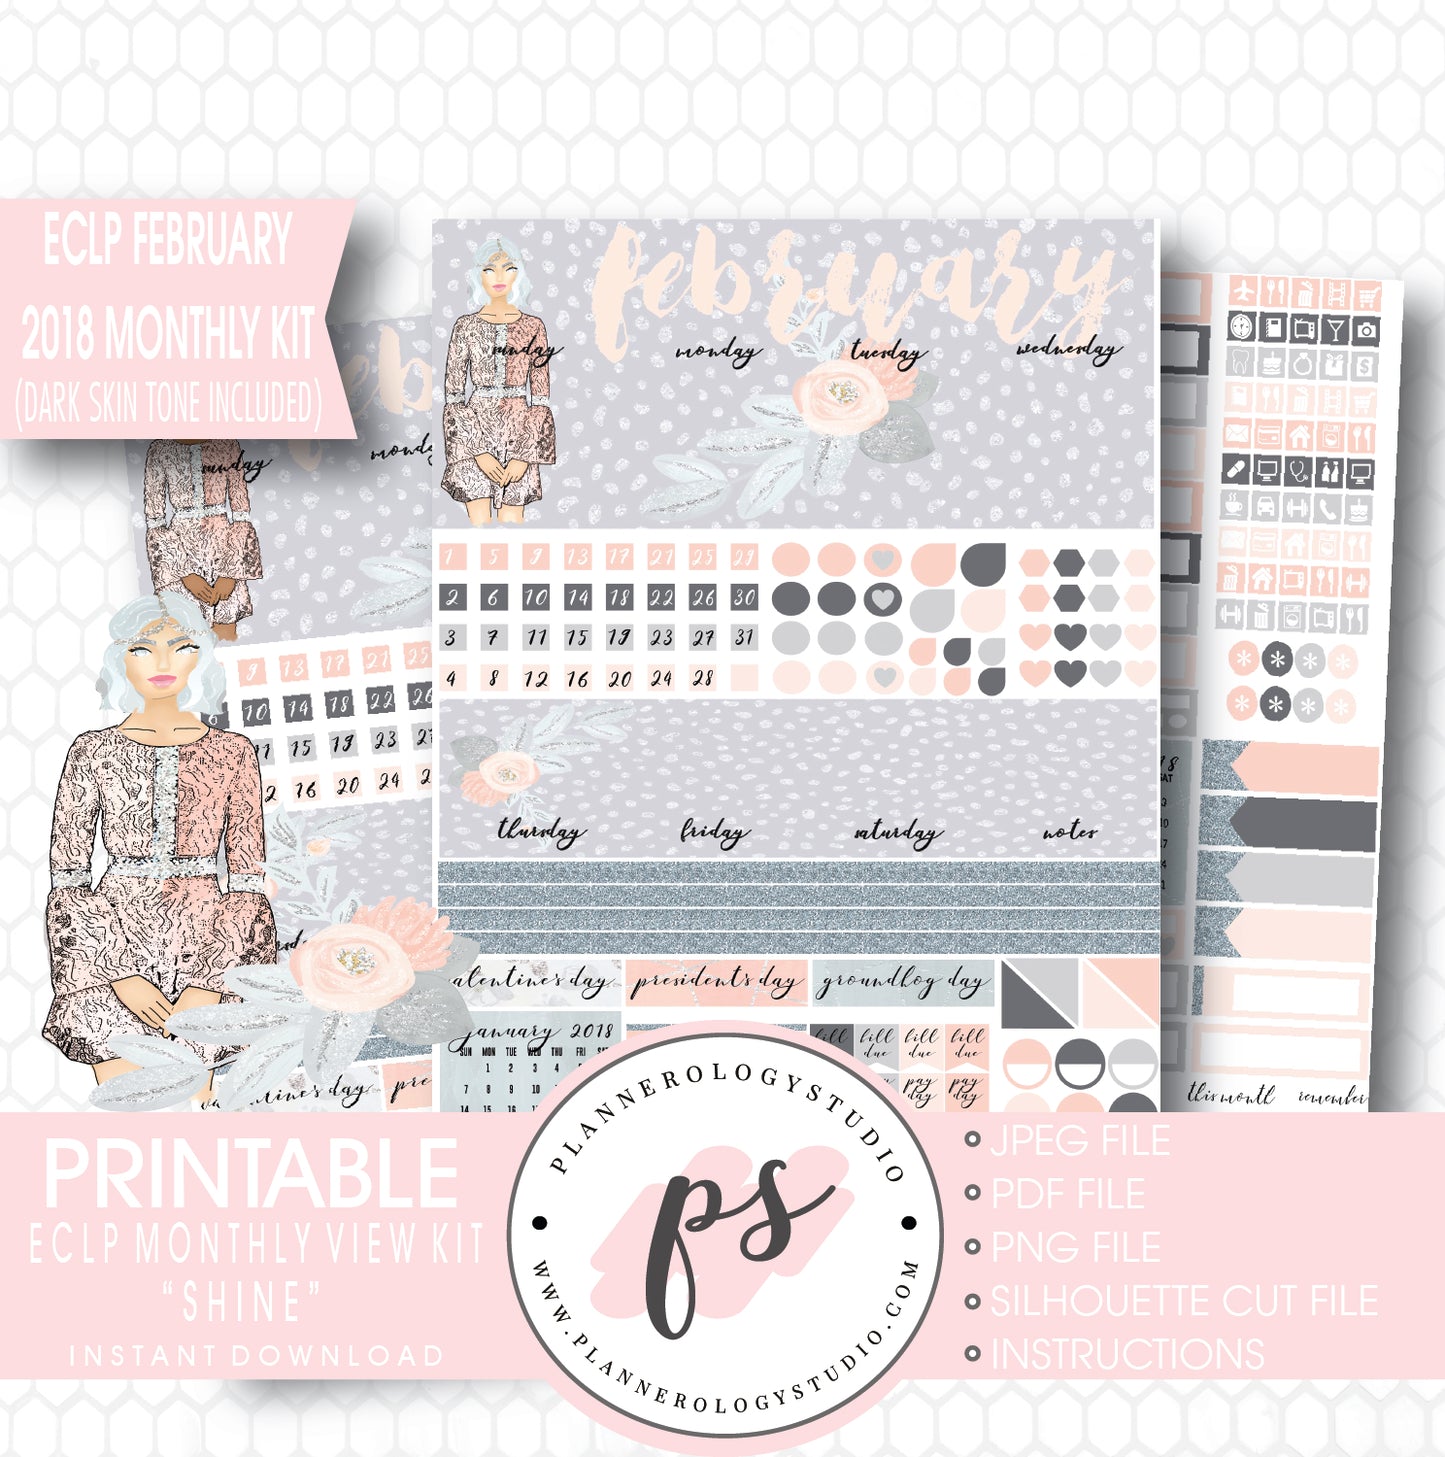 Shine February 2018 Monthly View Kit Printable Planner Stickers (for use with ECLP) (Dark & Light Skintone) - Plannerologystudio